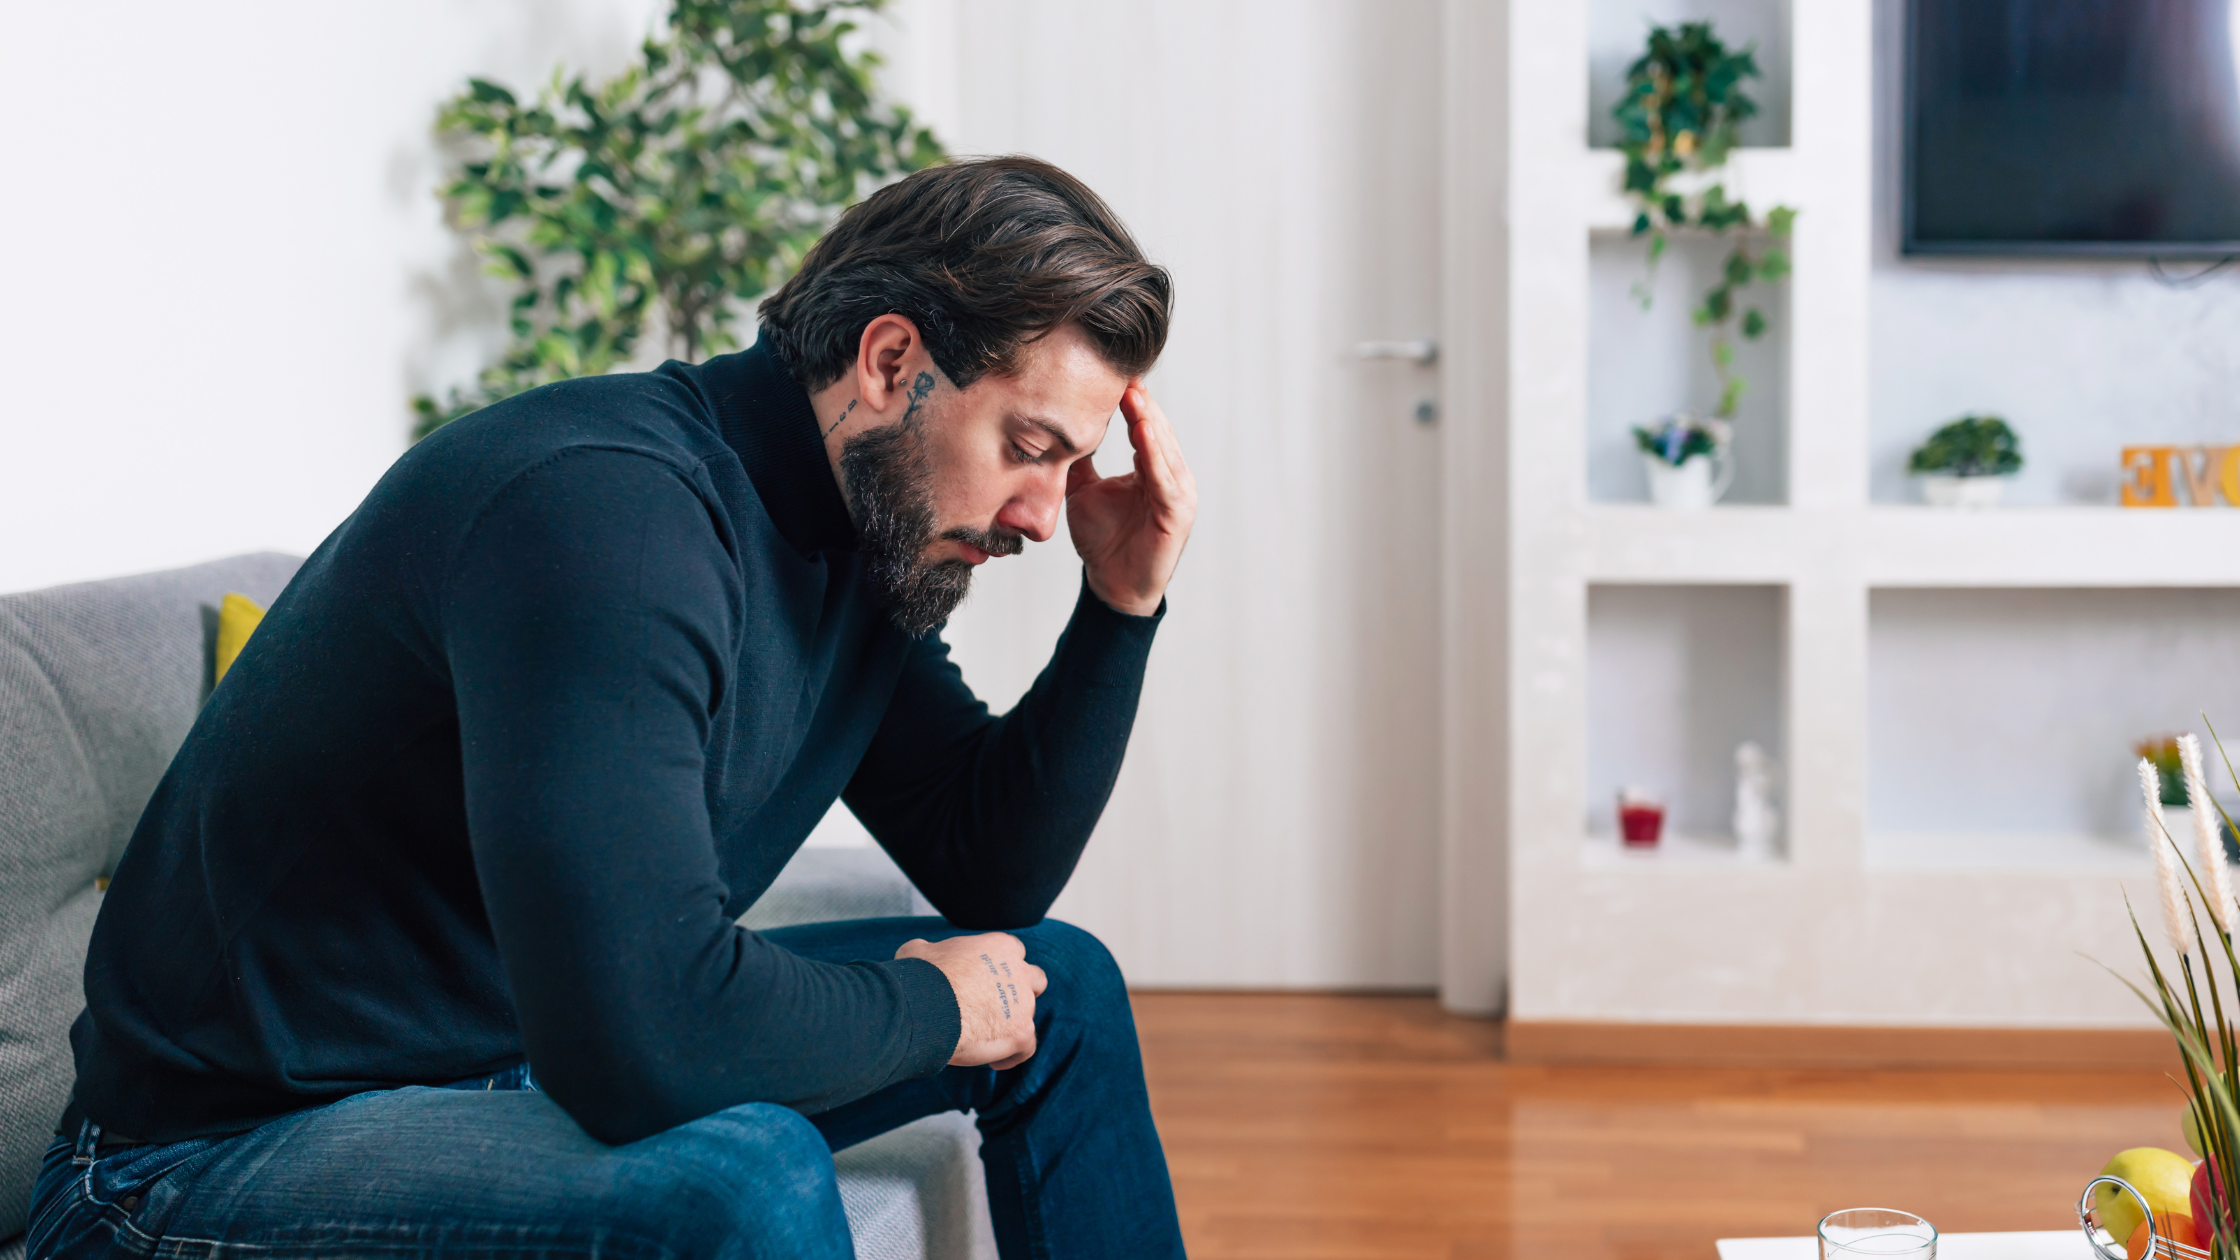 Depressed man in counseling focusing on mental health Services